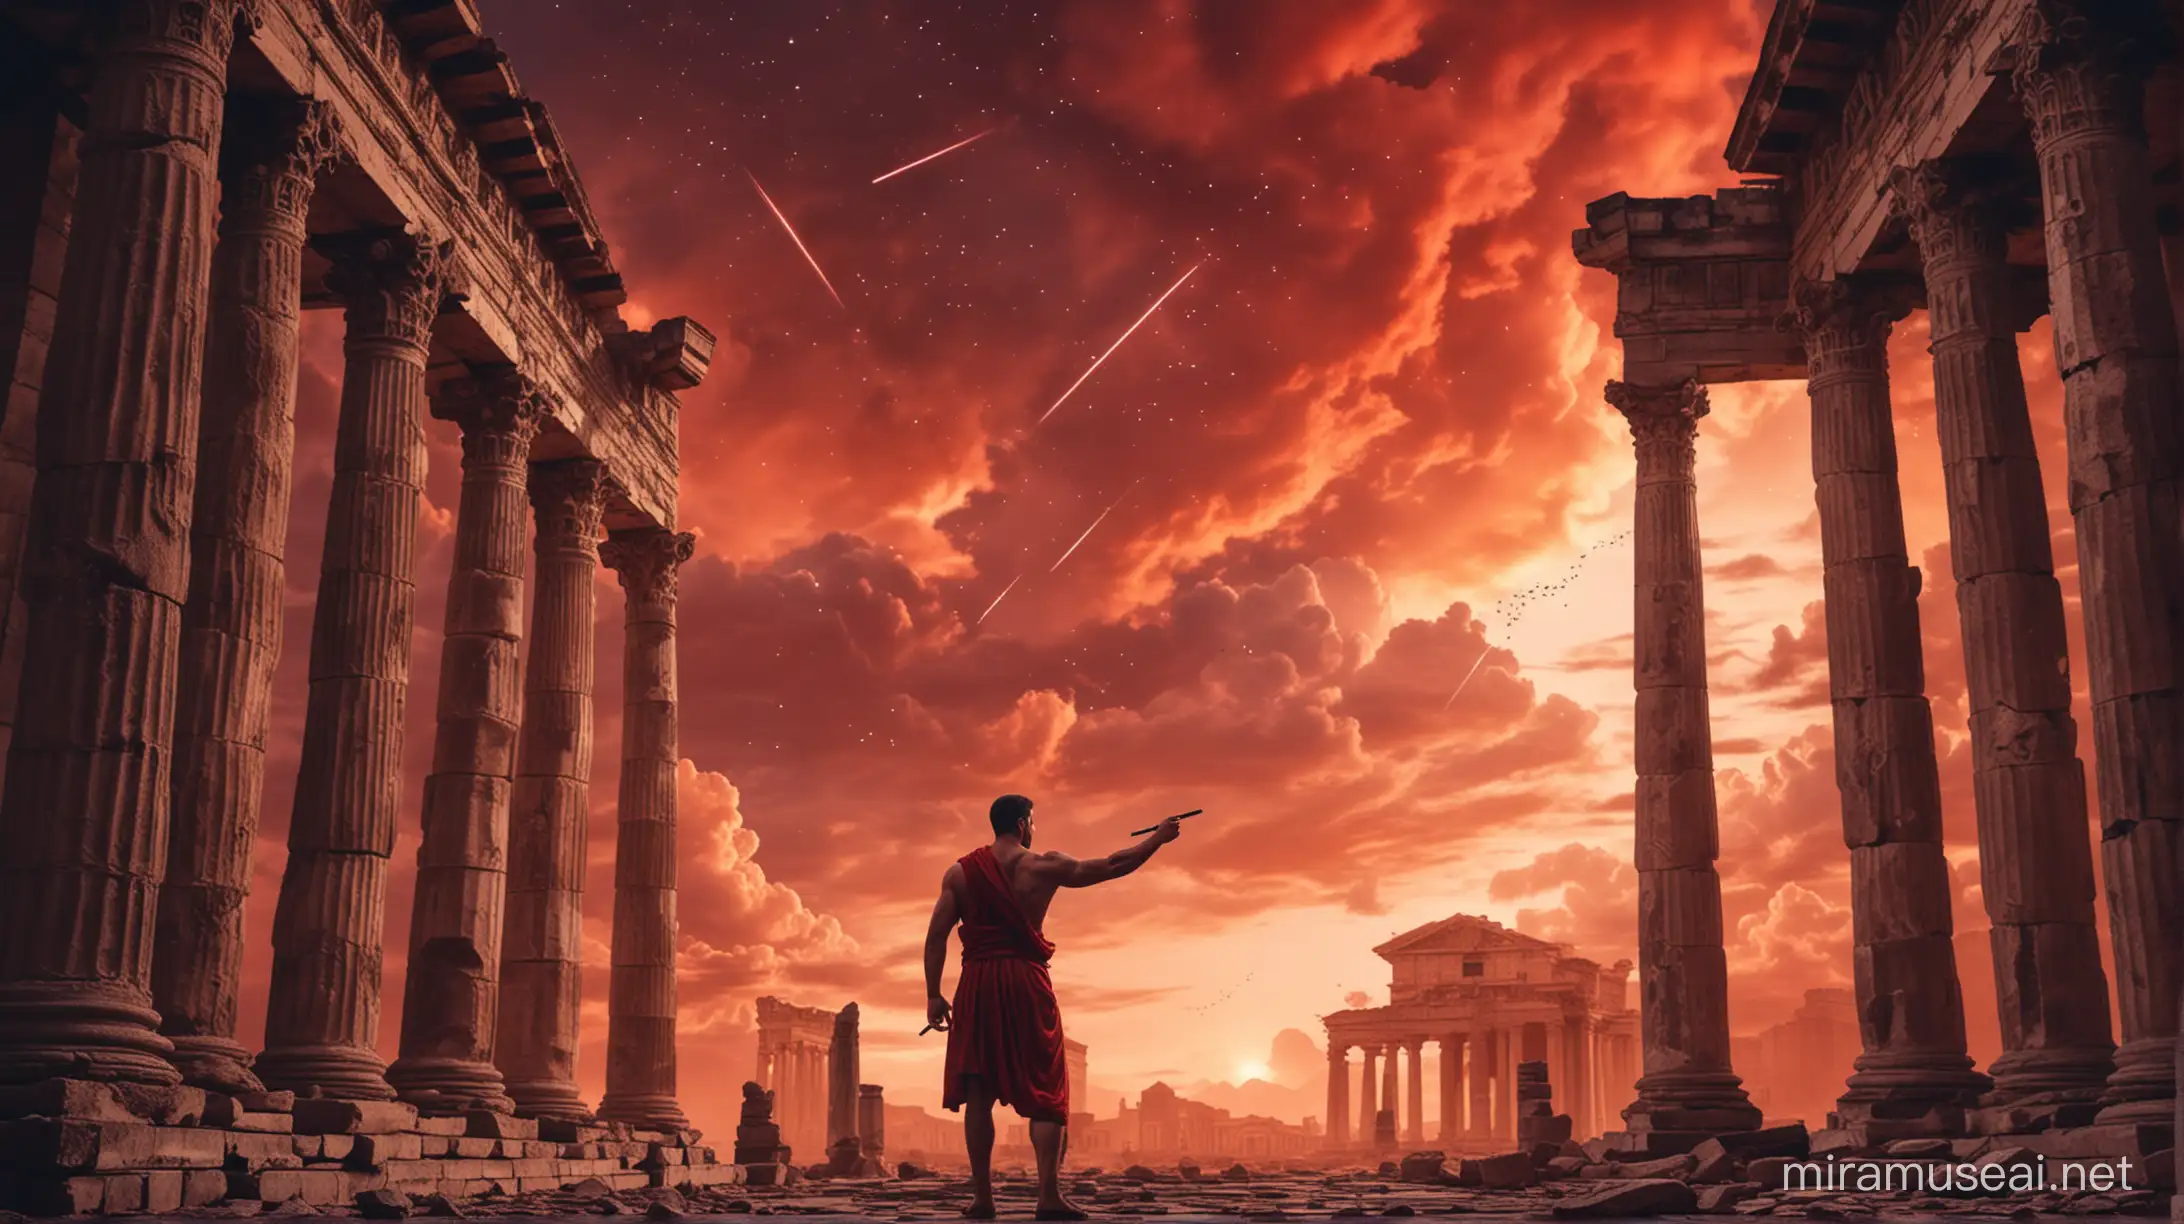 Stoicism, motivation, stoic muscular CHARACTER outdoors, dark stoic horizontal background. against the background of ancient buildings with columns, an image of thick red clouds behind the figure
shooting stars